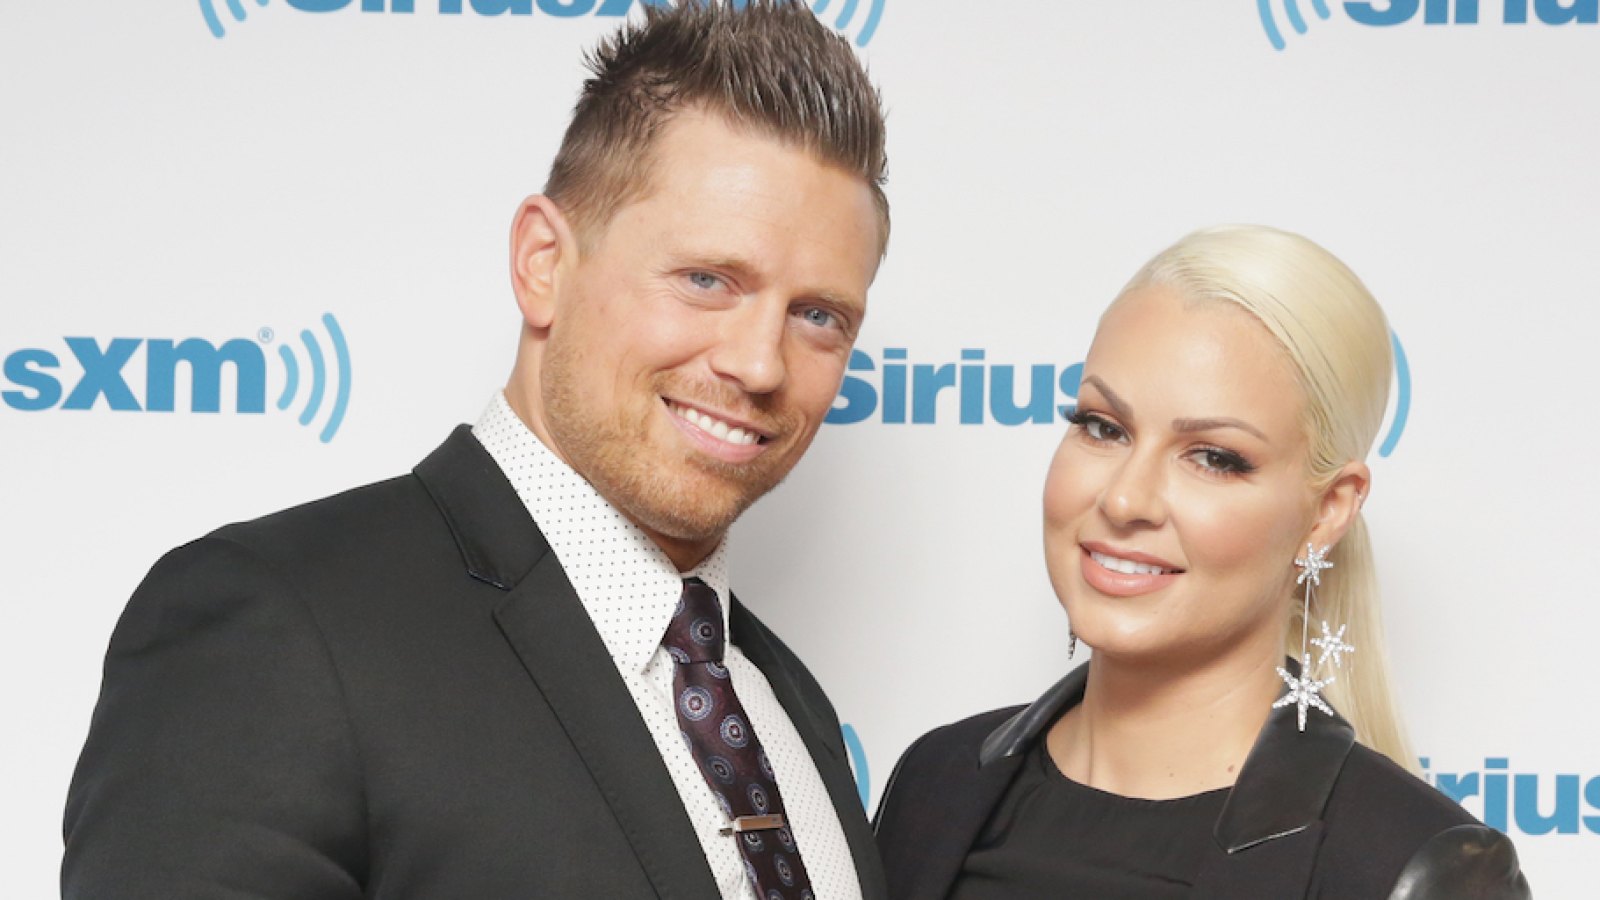 Who Is Mike 'The Miz' Mizanin's Wife? All About Wrestler Maryse Ouellet